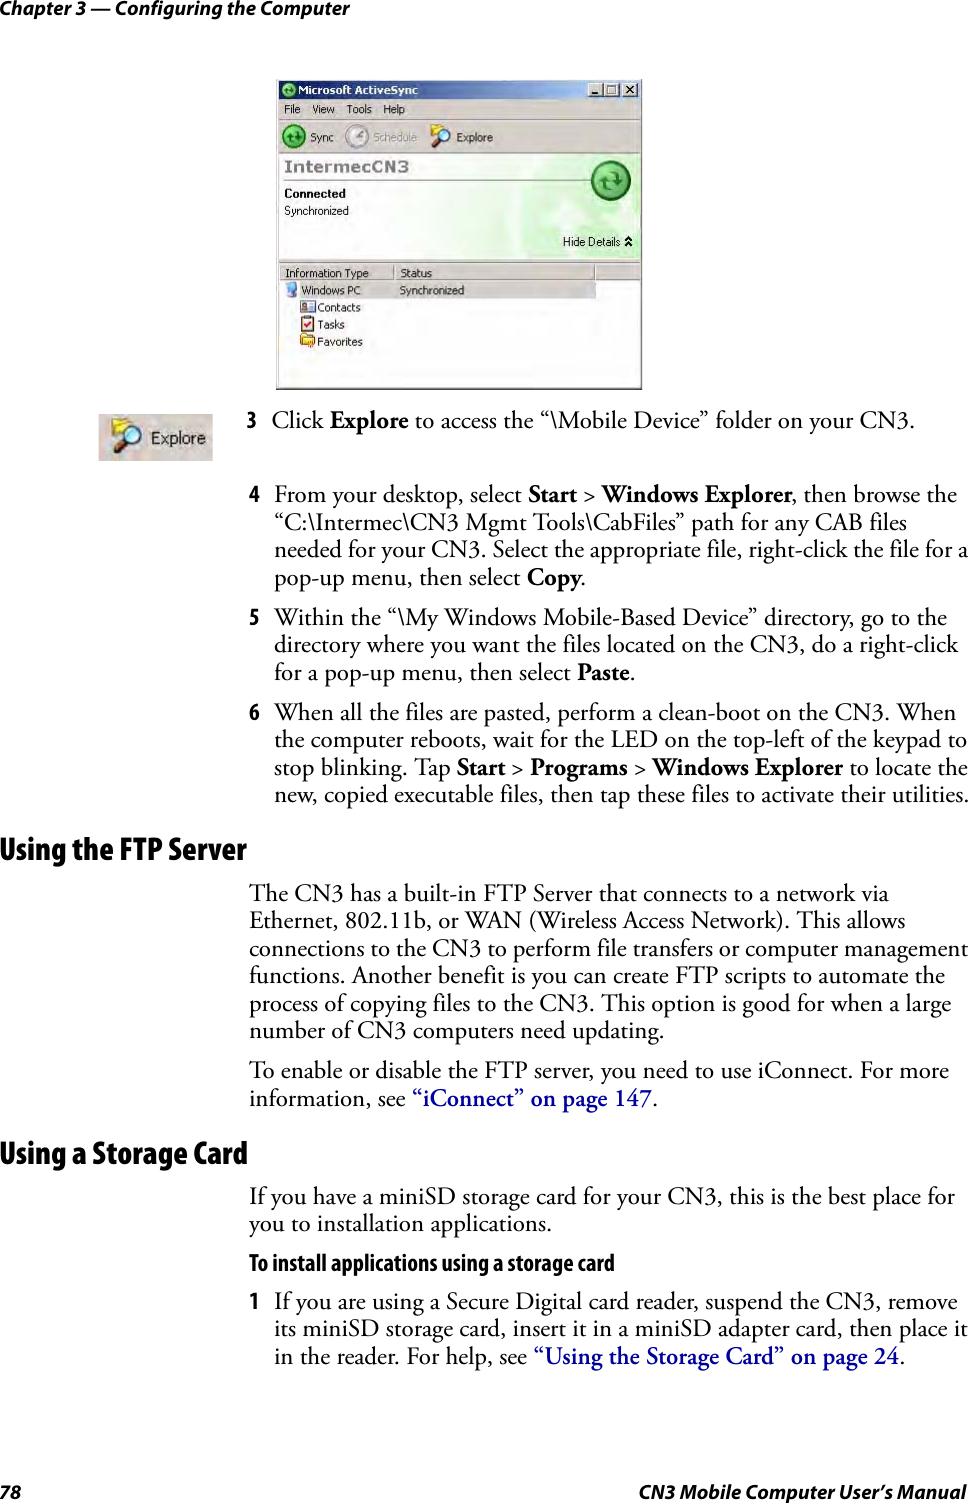 Chapter 3 — Configuring the Computer78 CN3 Mobile Computer User’s Manual4From your desktop, select Start &gt; Windows Explorer, then browse the “C:\Intermec\CN3 Mgmt Tools\CabFiles” path for any CAB files needed for your CN3. Select the appropriate file, right-click the file for a pop-up menu, then select Copy.5Within the “\My Windows Mobile-Based Device” directory, go to the directory where you want the files located on the CN3, do a right-click for a pop-up menu, then select Paste.6When all the files are pasted, perform a clean-boot on the CN3. When the computer reboots, wait for the LED on the top-left of the keypad to stop blinking. Tap Start &gt; Programs &gt; Windows Explorer to locate the new, copied executable files, then tap these files to activate their utilities.Using the FTP ServerThe CN3 has a built-in FTP Server that connects to a network via Ethernet, 802.11b, or WAN (Wireless Access Network). This allows connections to the CN3 to perform file transfers or computer management functions. Another benefit is you can create FTP scripts to automate the process of copying files to the CN3. This option is good for when a large number of CN3 computers need updating. To enable or disable the FTP server, you need to use iConnect. For more information, see “iConnect” on page 147.Using a Storage CardIf you have a miniSD storage card for your CN3, this is the best place for you to installation applications.To install applications using a storage card1If you are using a Secure Digital card reader, suspend the CN3, remove its miniSD storage card, insert it in a miniSD adapter card, then place it in the reader. For help, see “Using the Storage Card” on page 24.3Click Explore to access the “\Mobile Device” folder on your CN3.